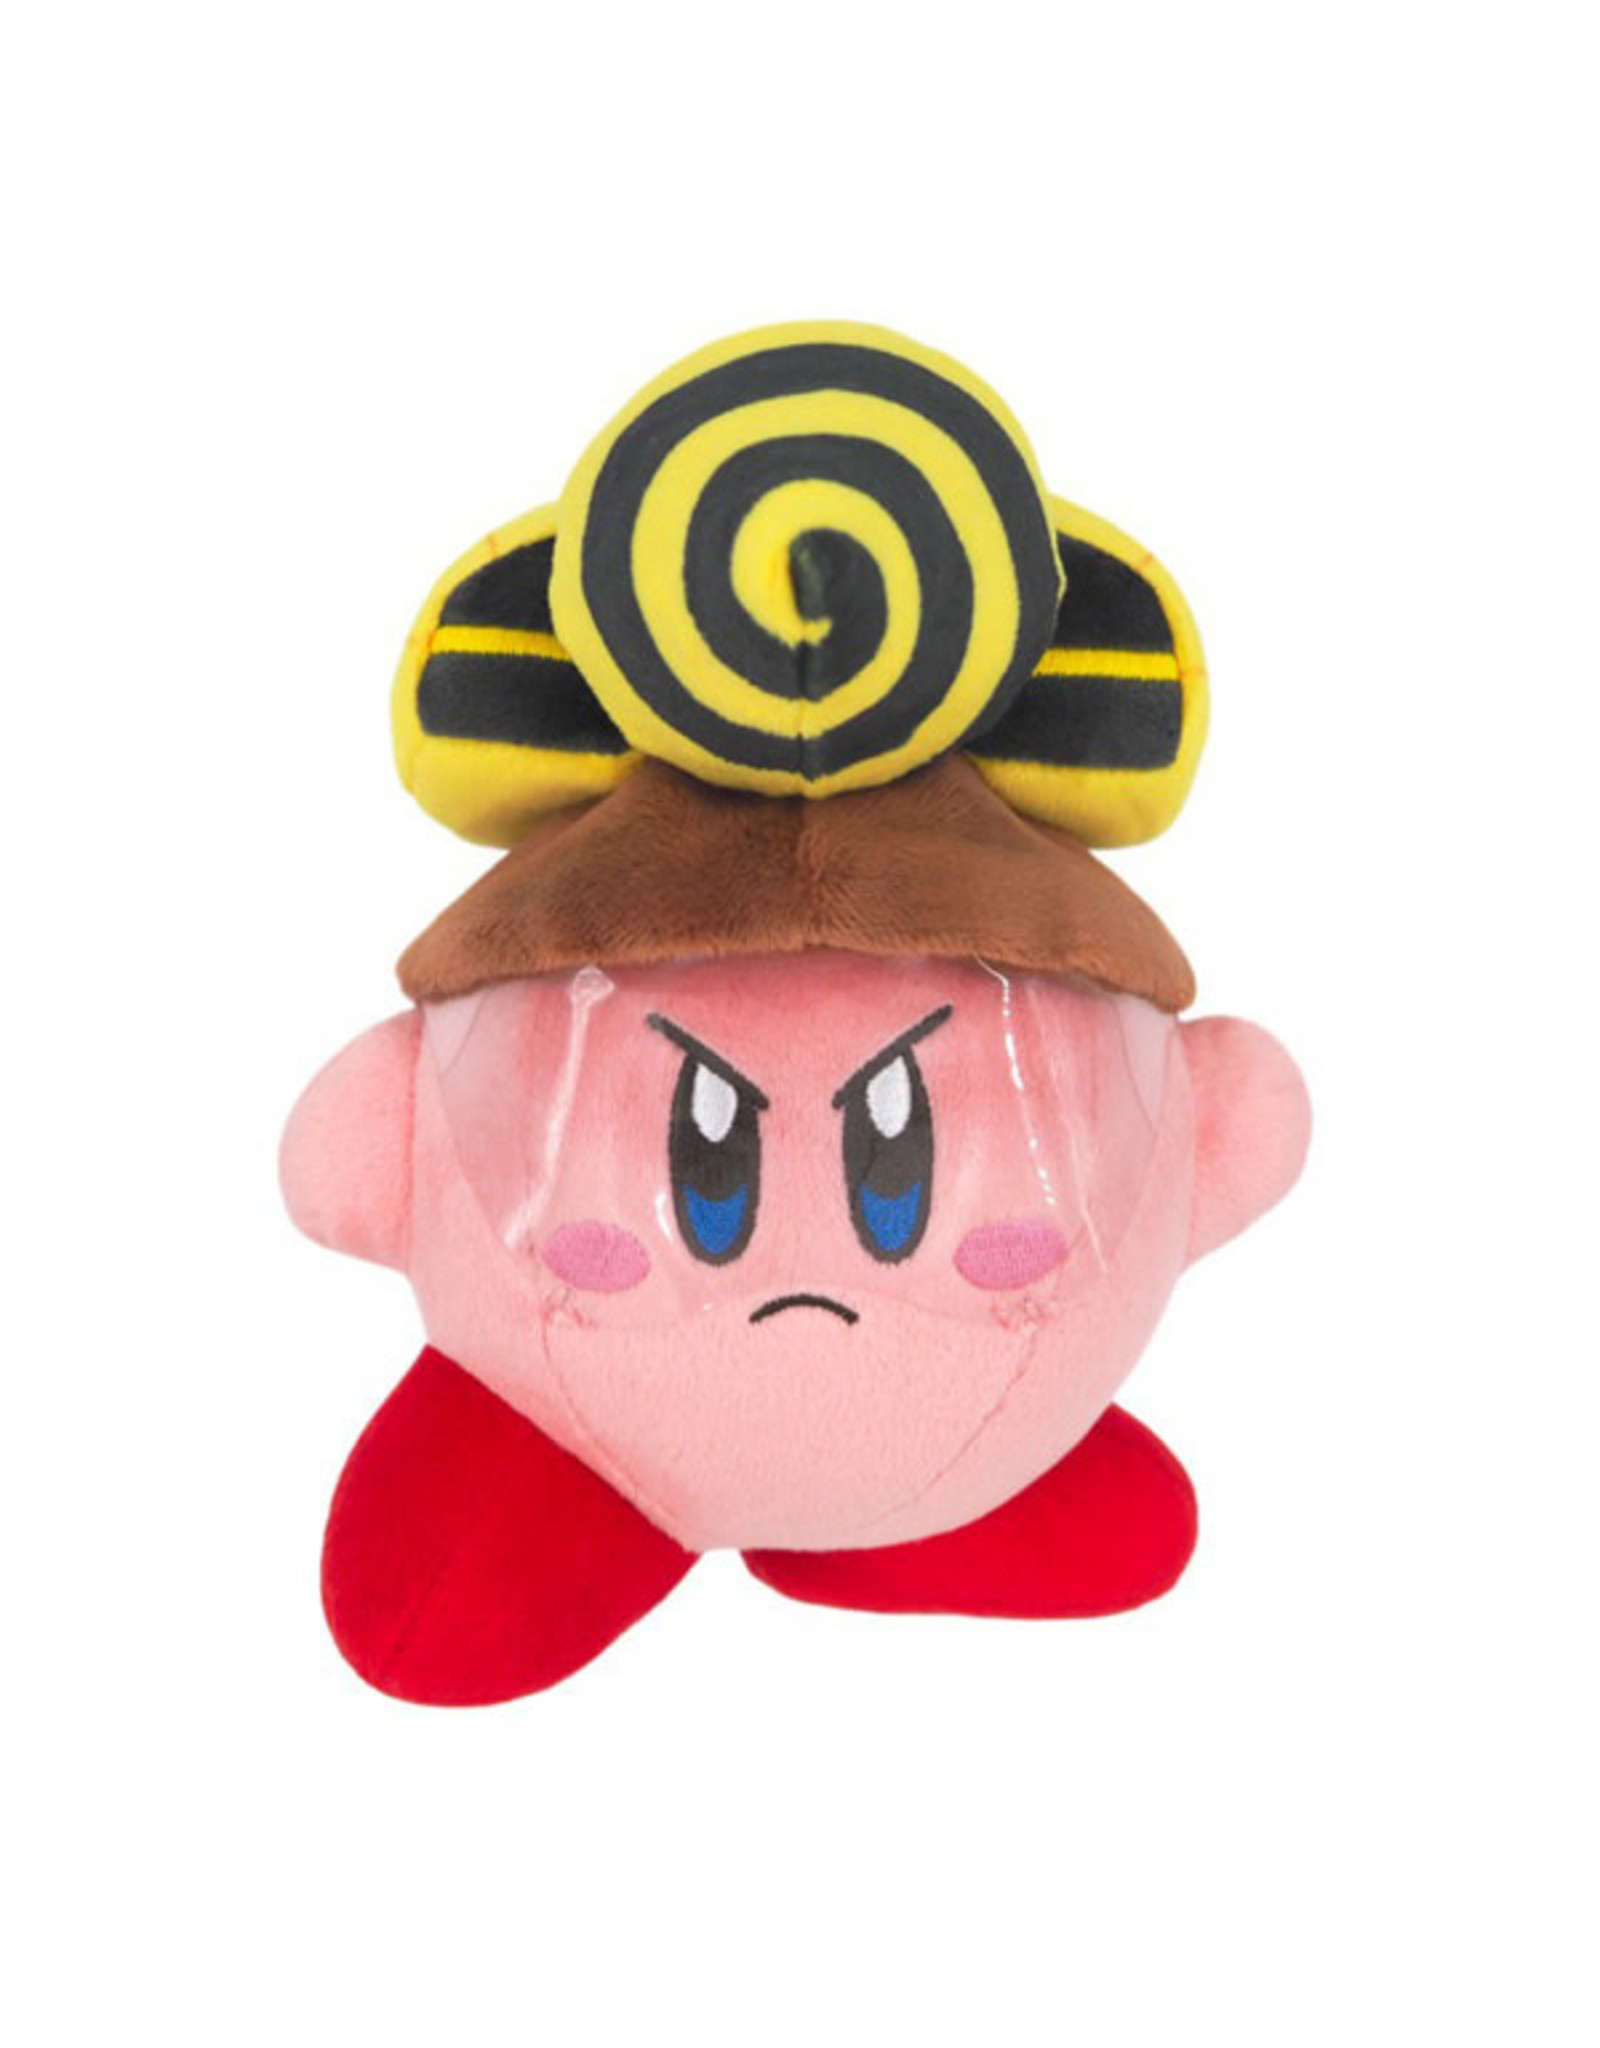 Sanei Sanei- Kirby's Dreamland All Star Collection - Drill Kirby Small Plush